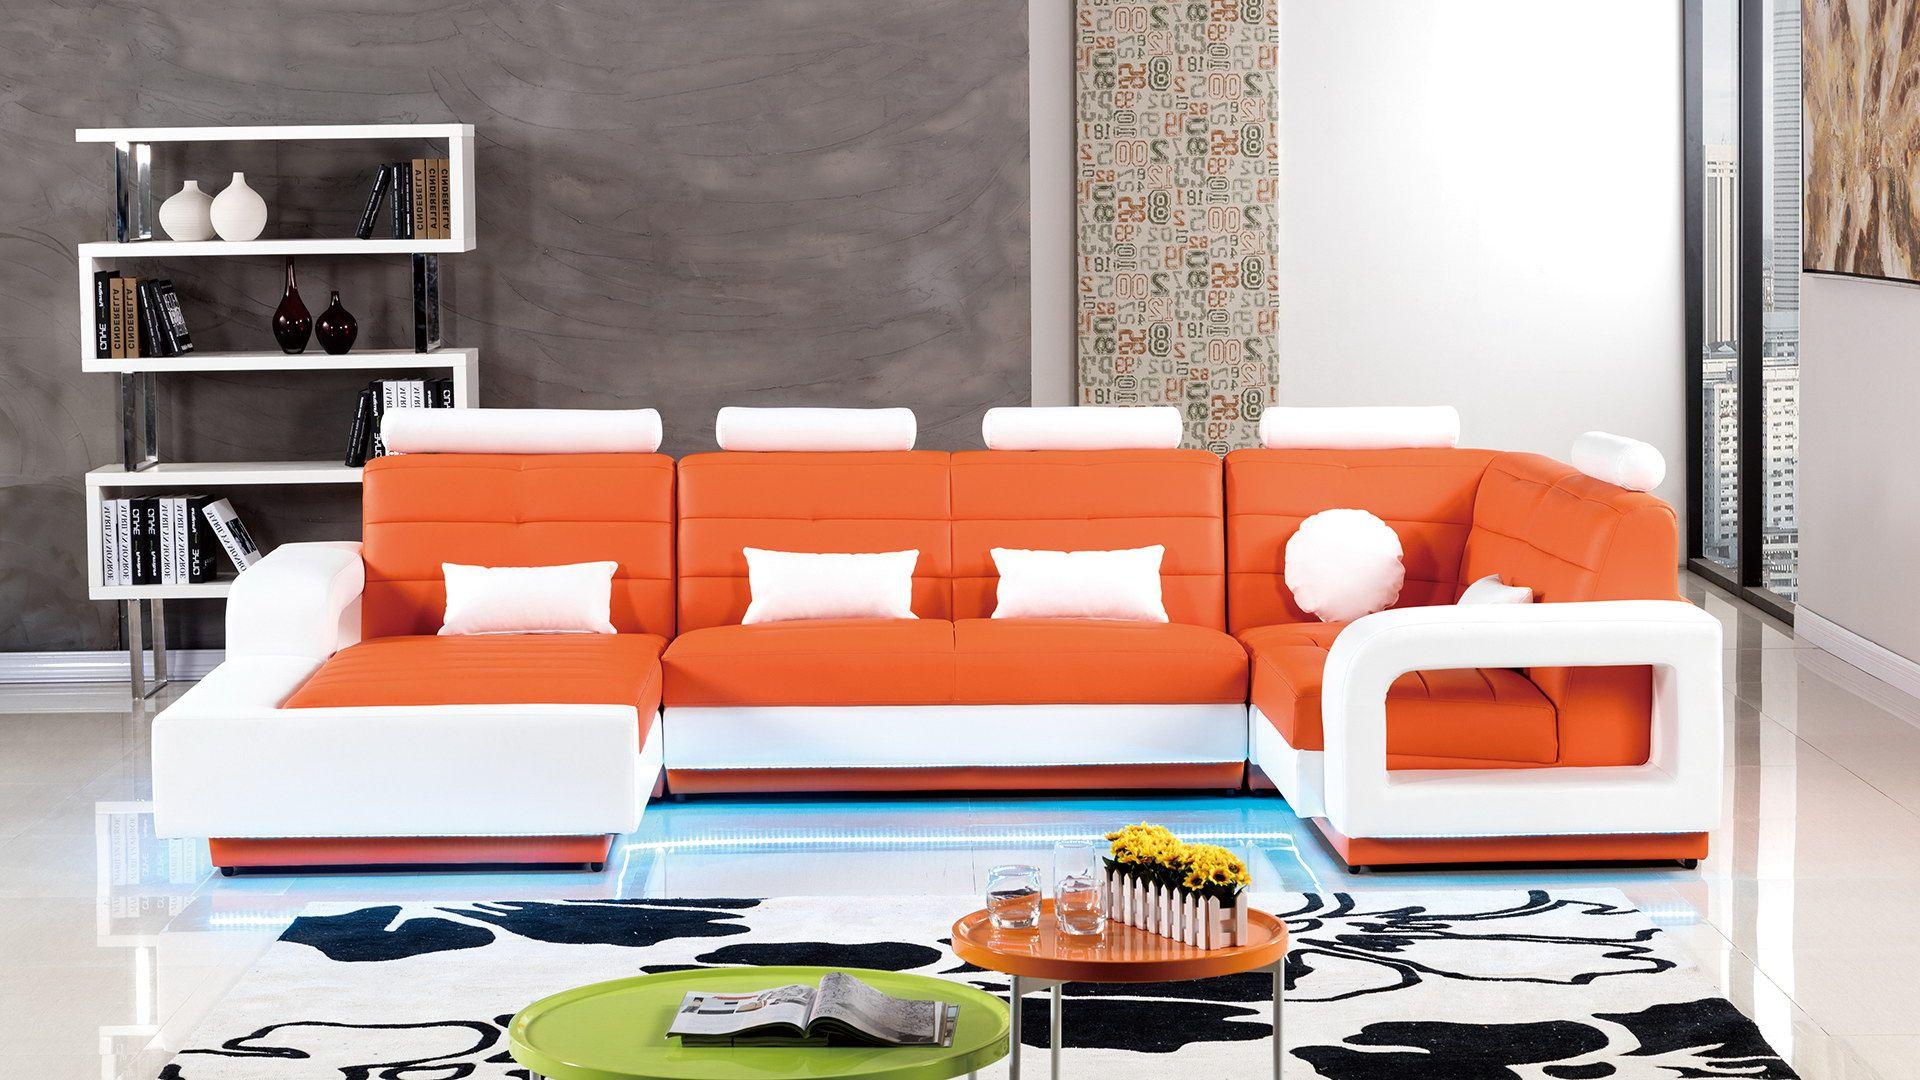 Contemporary, Modern Sectional Sofa AE-LD800-ORG.W AE-LD800L-ORG.W in White, Orange Bonded Leather